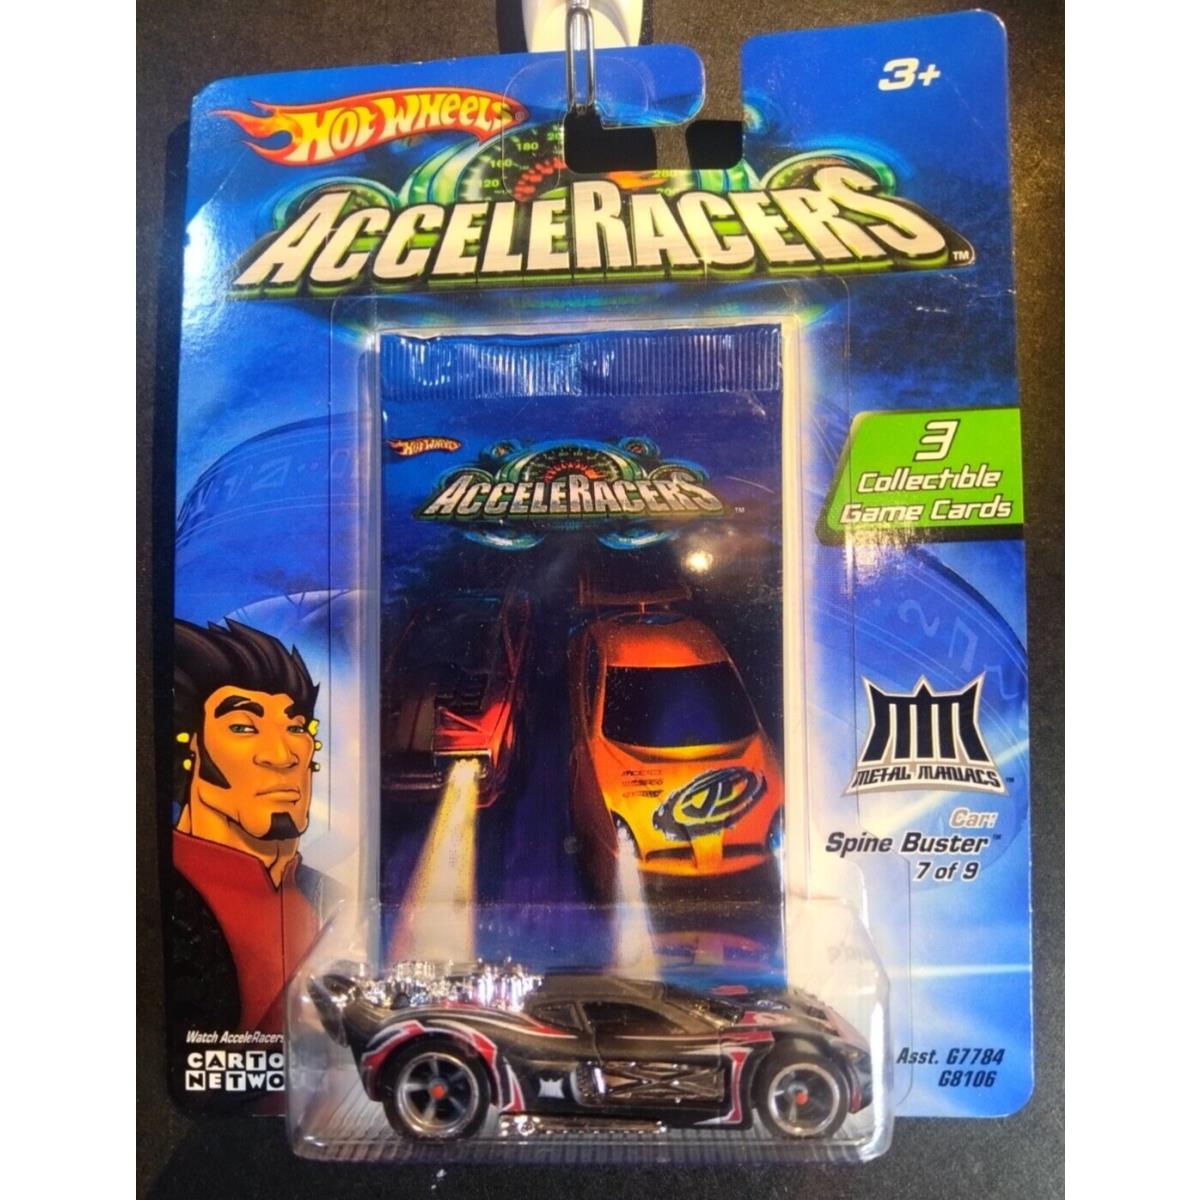 2004 Hot Wheels Acceleracers Spine Buster 7/9 W/card 3-pack Unopened